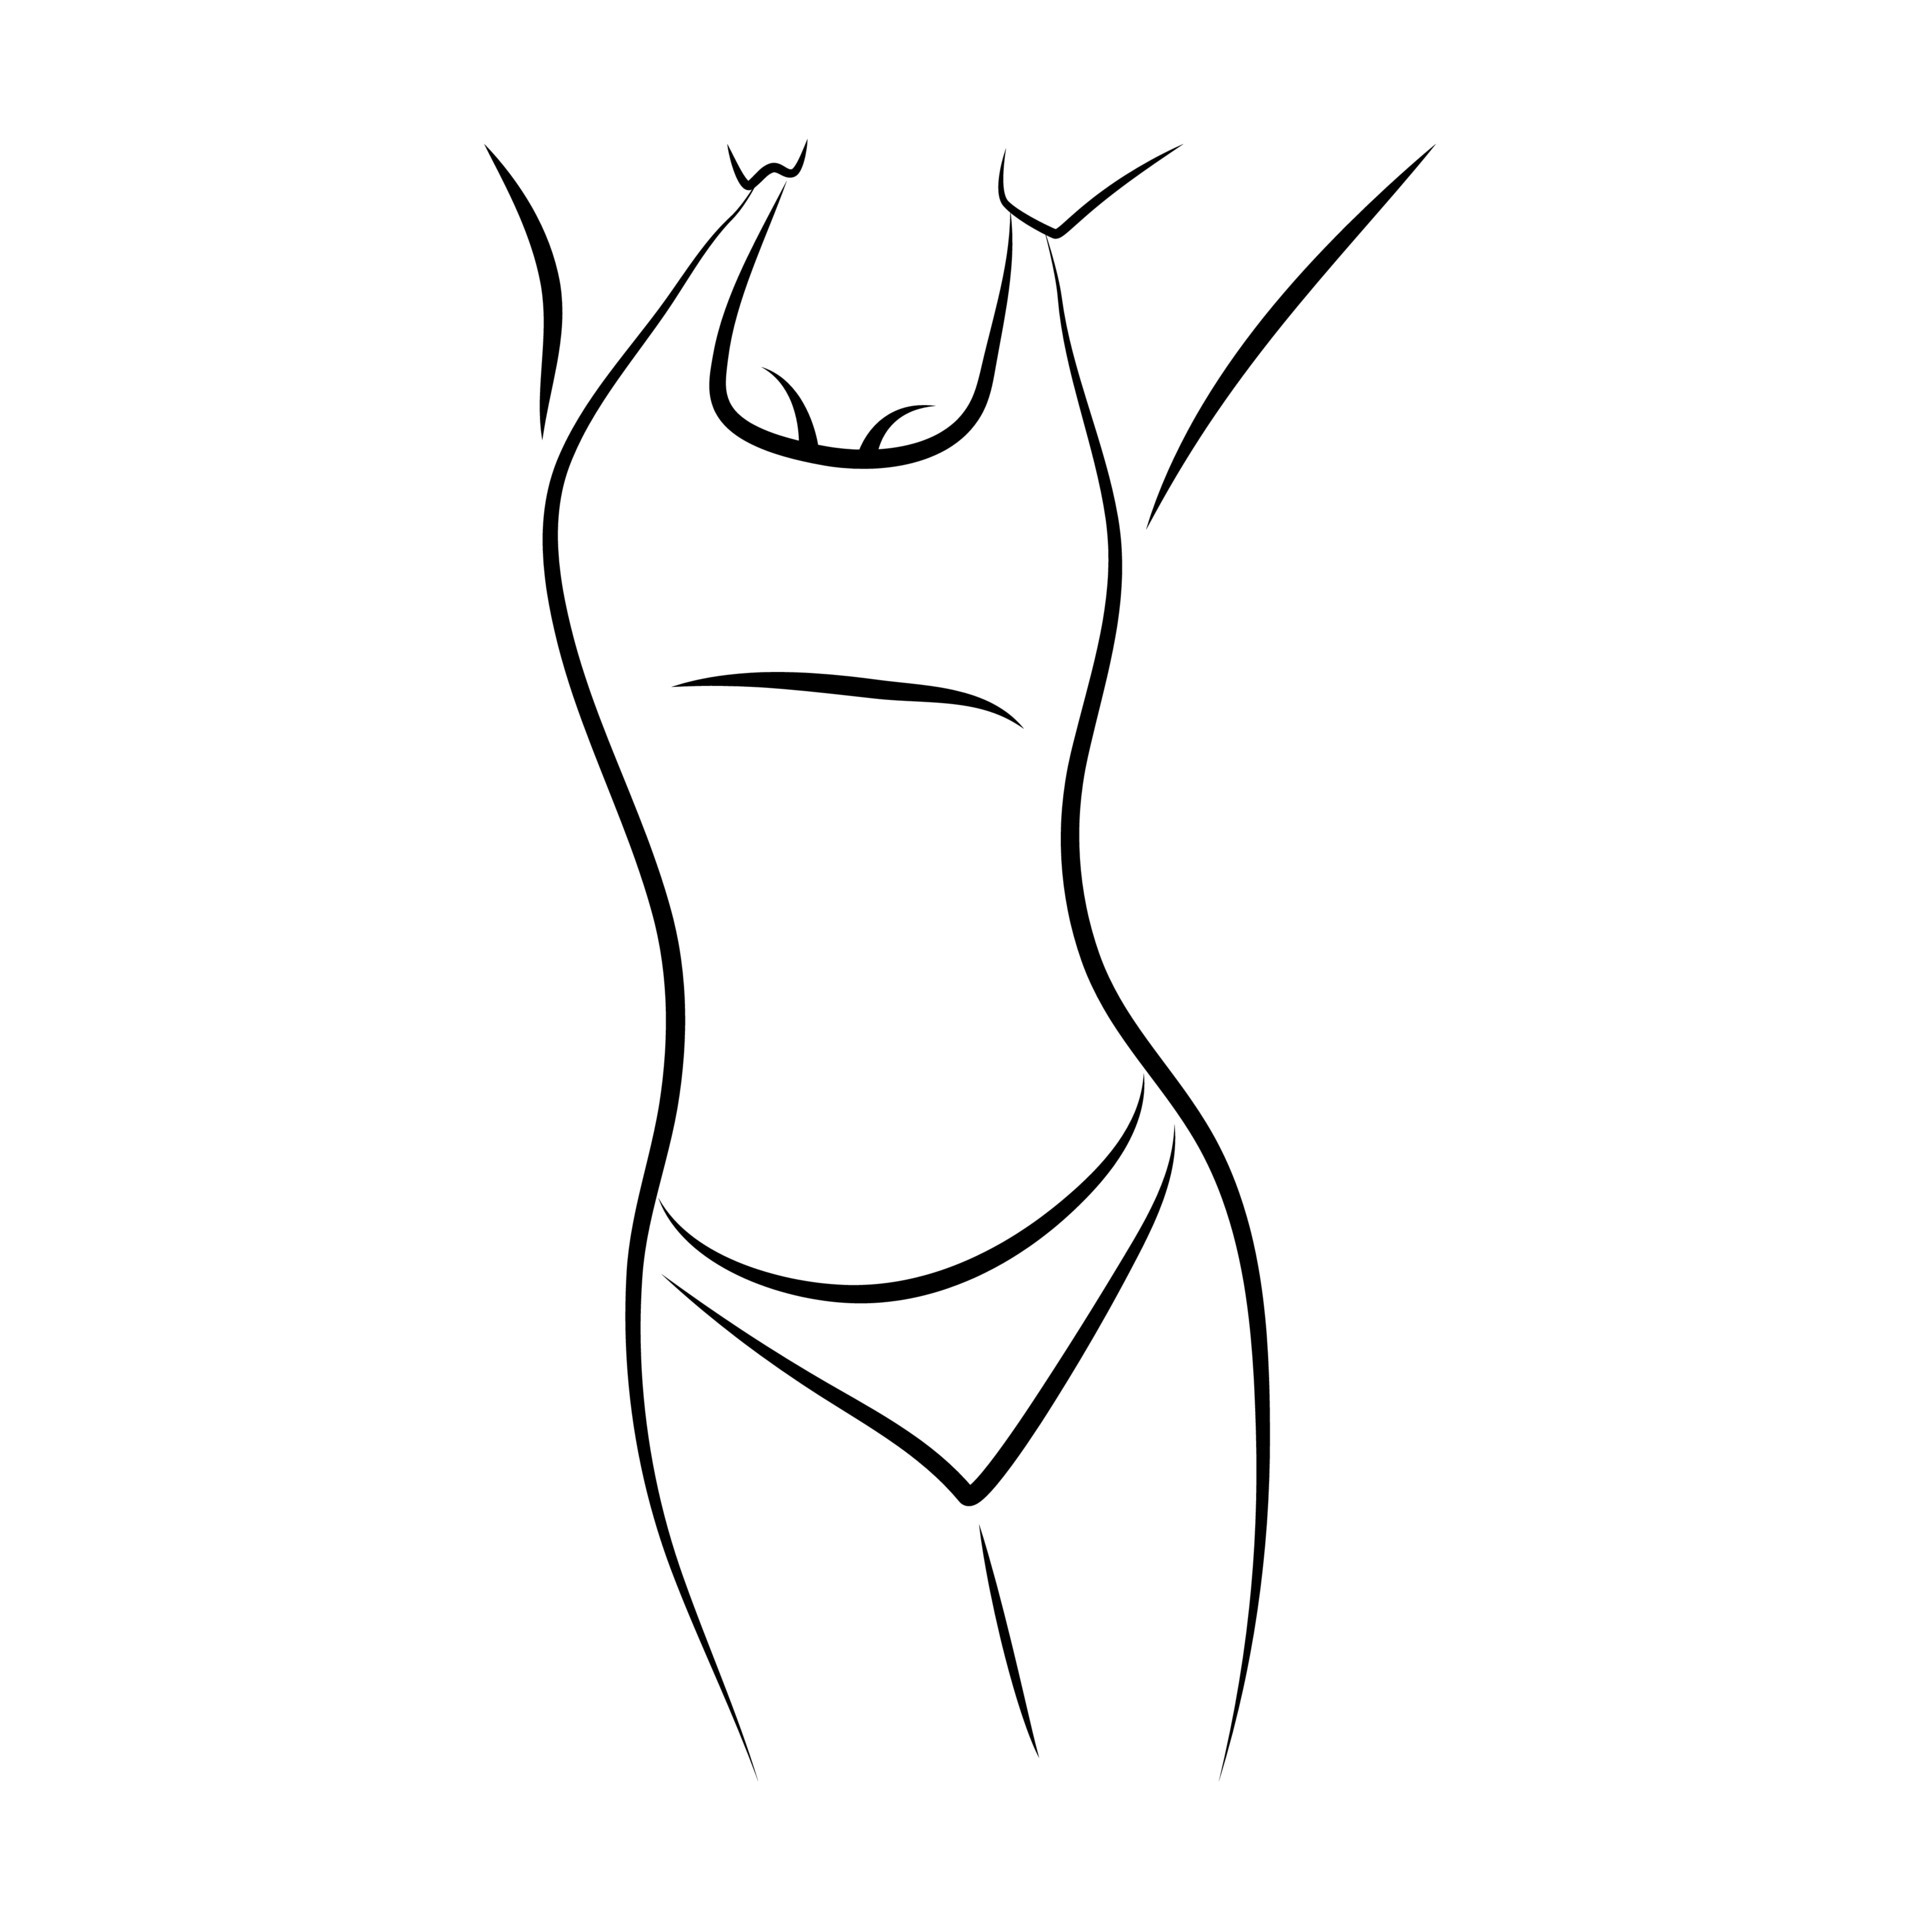 https://static.vecteezy.com/system/resources/previews/004/532/859/original/female-body-female-figure-creative-contemporary-abstract-line-drawing-female-naked-body-fashion-beauty-minimalist-design-for-wall-art-prints-cards-posters-vector.jpg